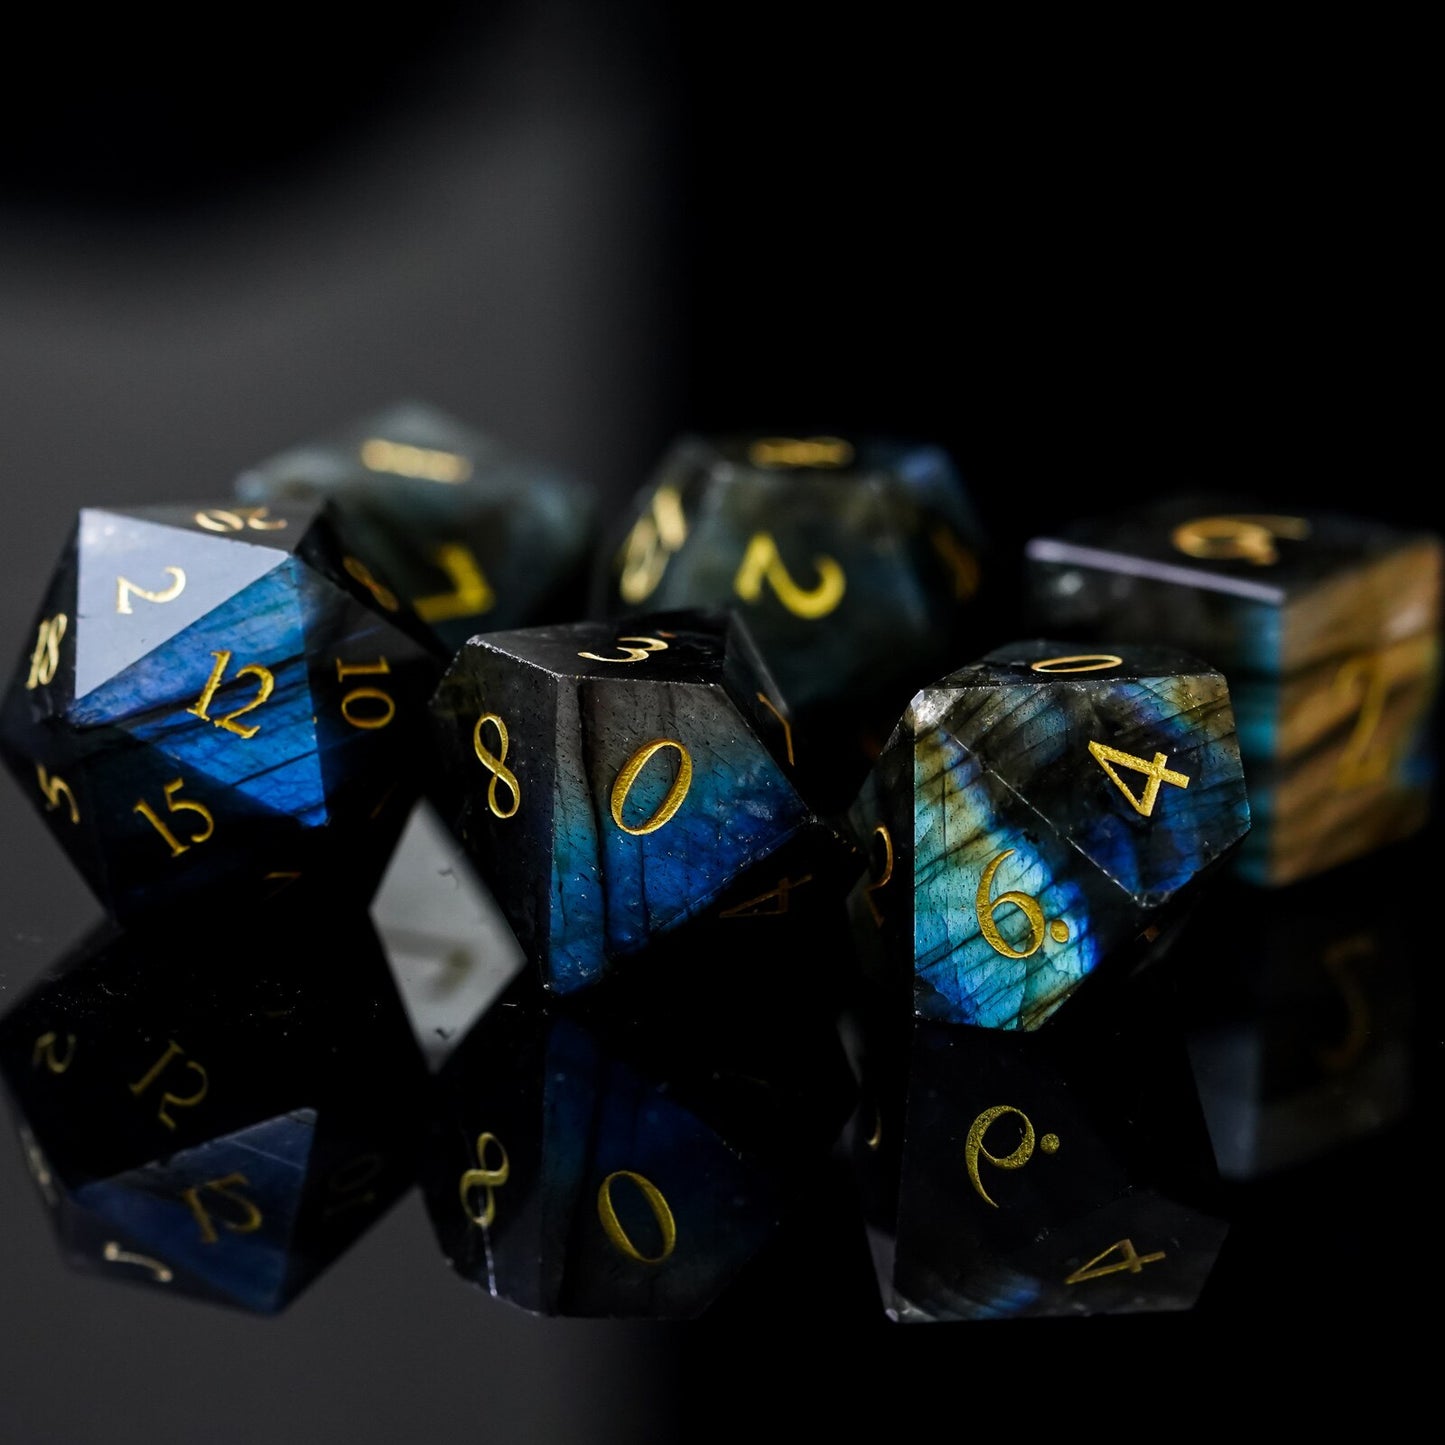 7 piece stone dice set, labradorite dark blue and black with gold numbering